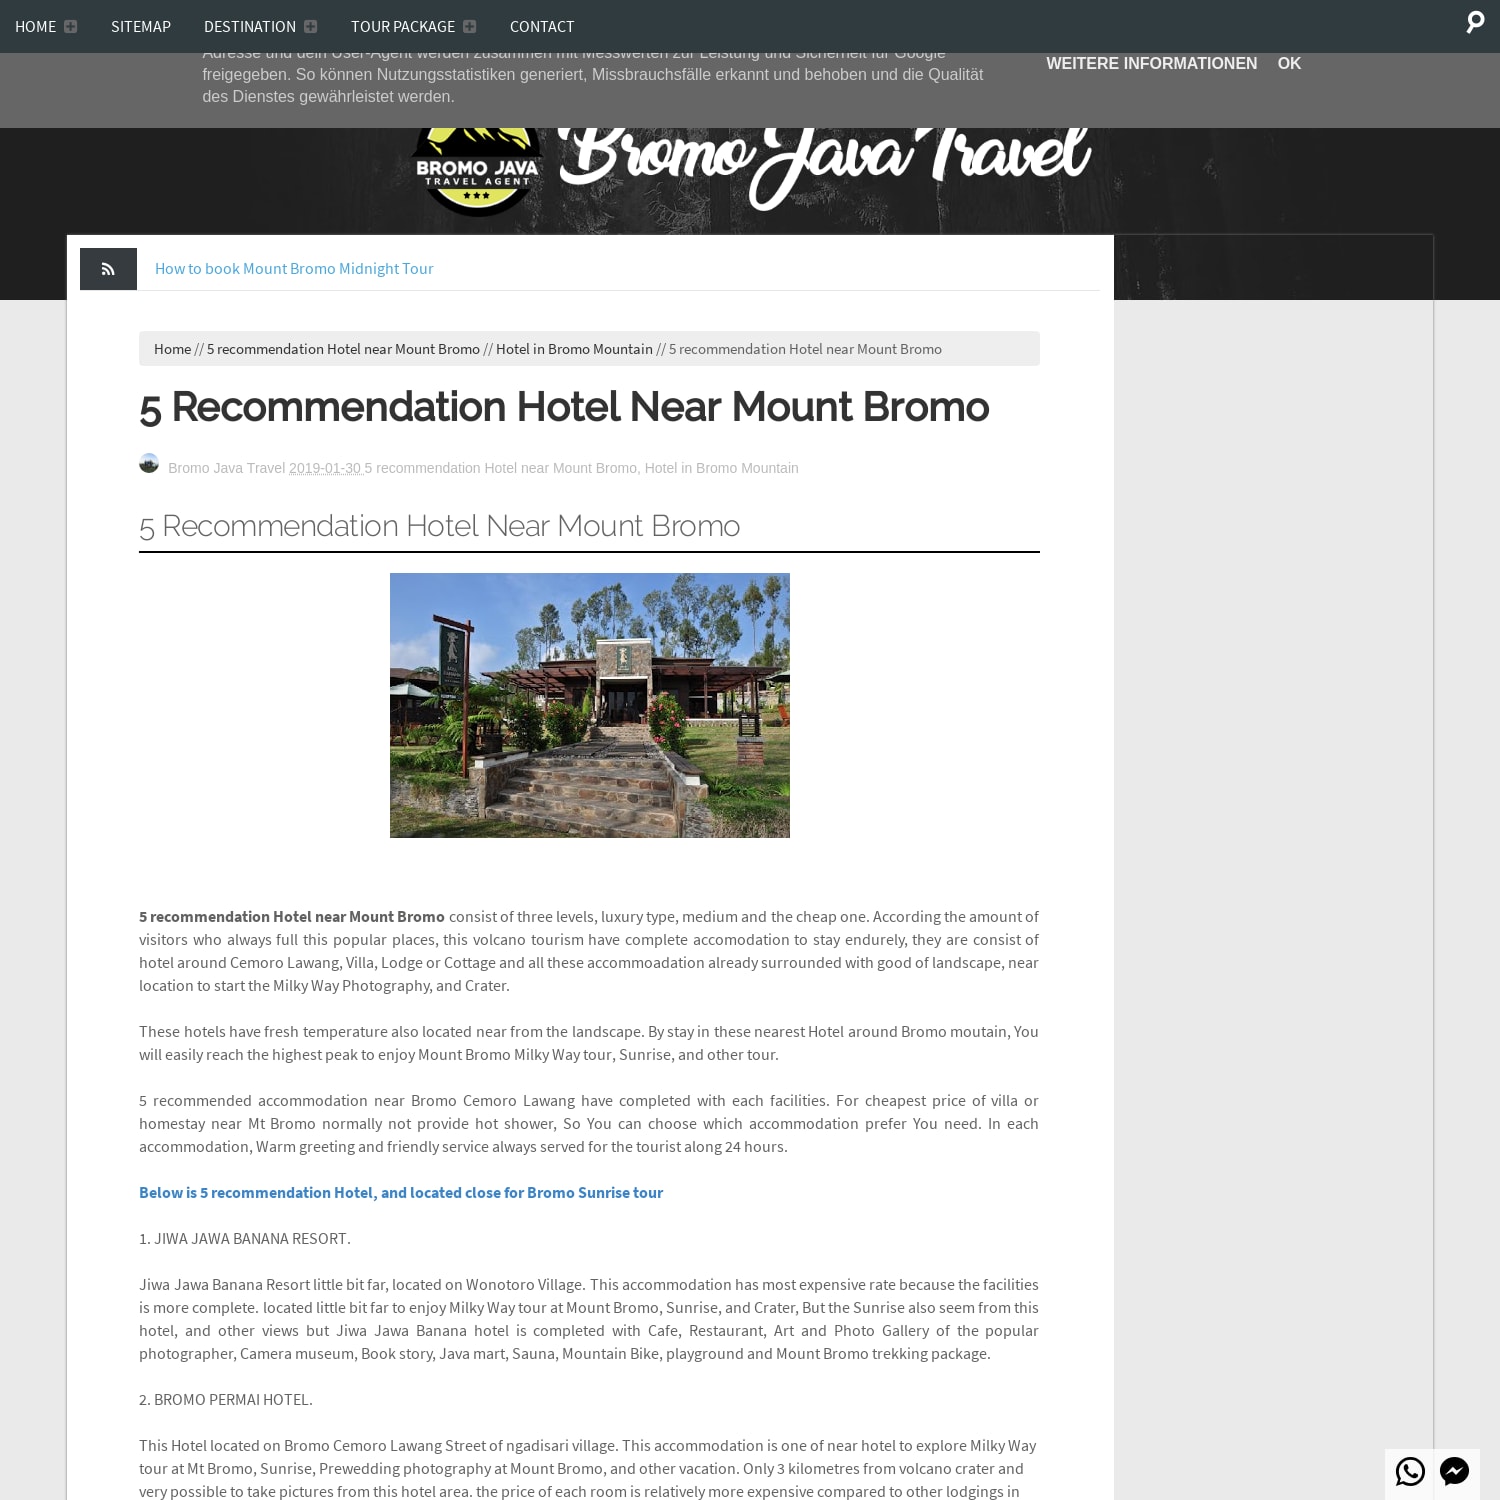 5 recommendation Hotel near Mount Bromo